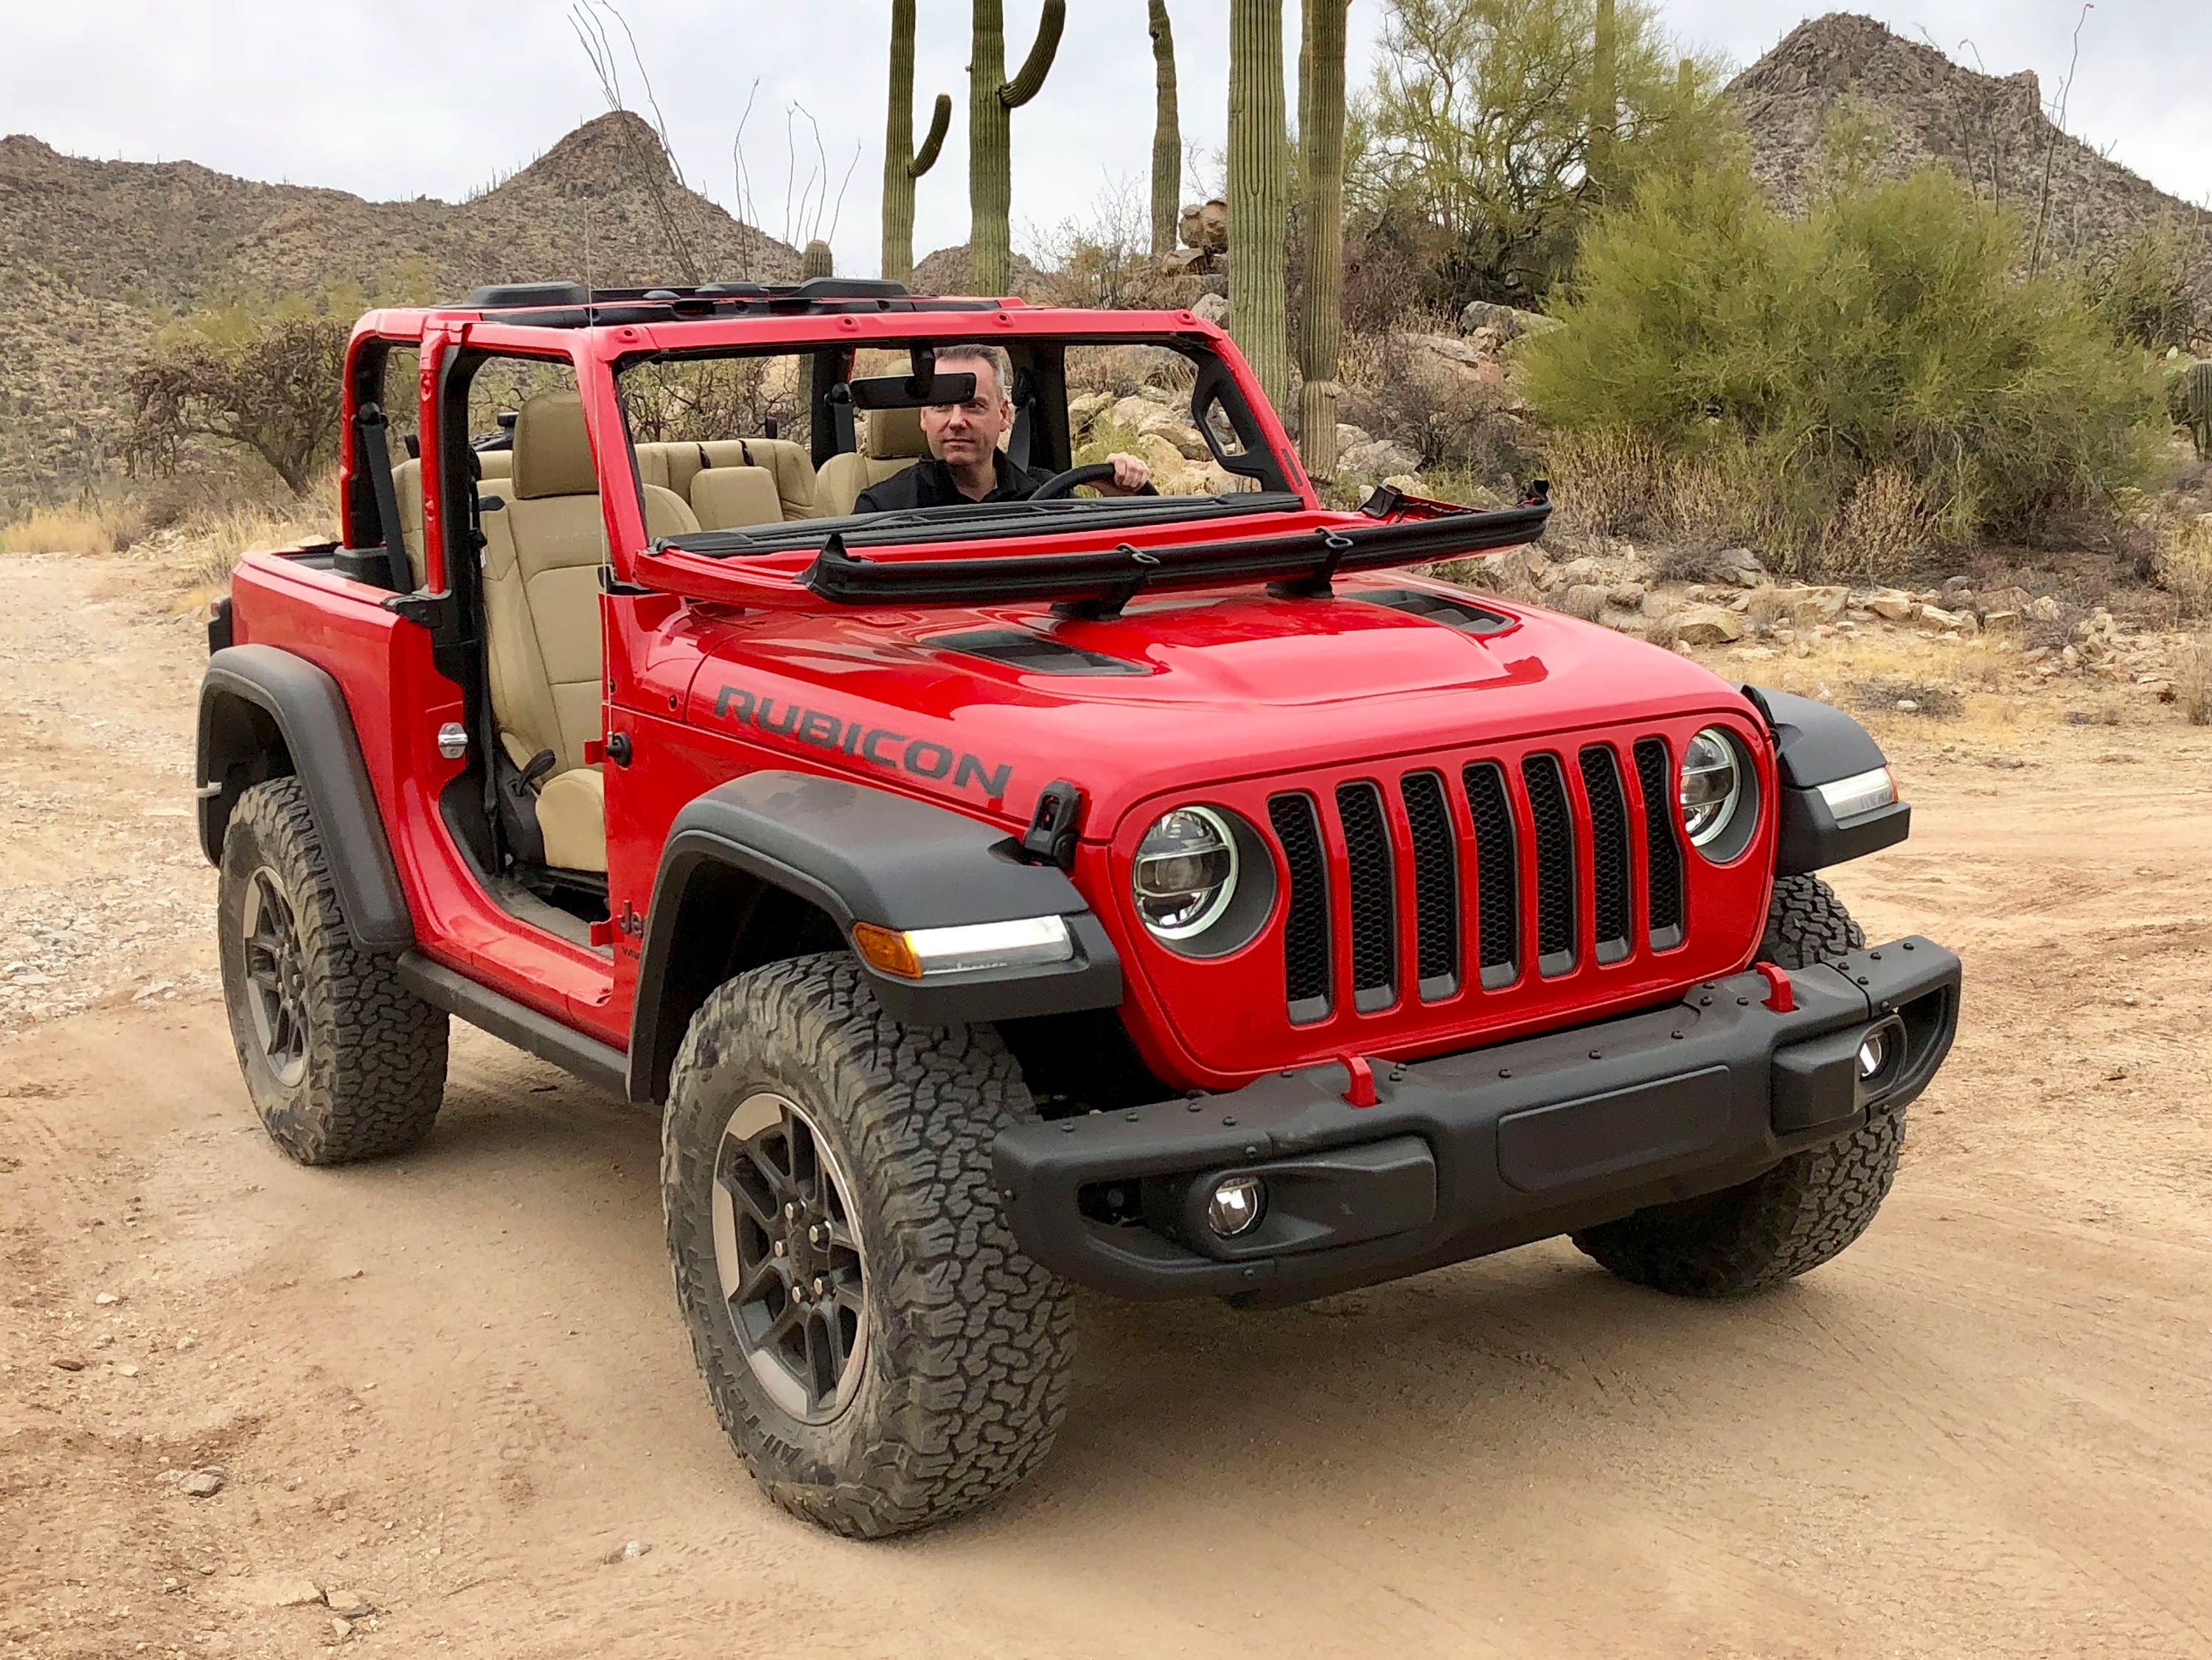 2018 Jeep Wrangler JL - First Look